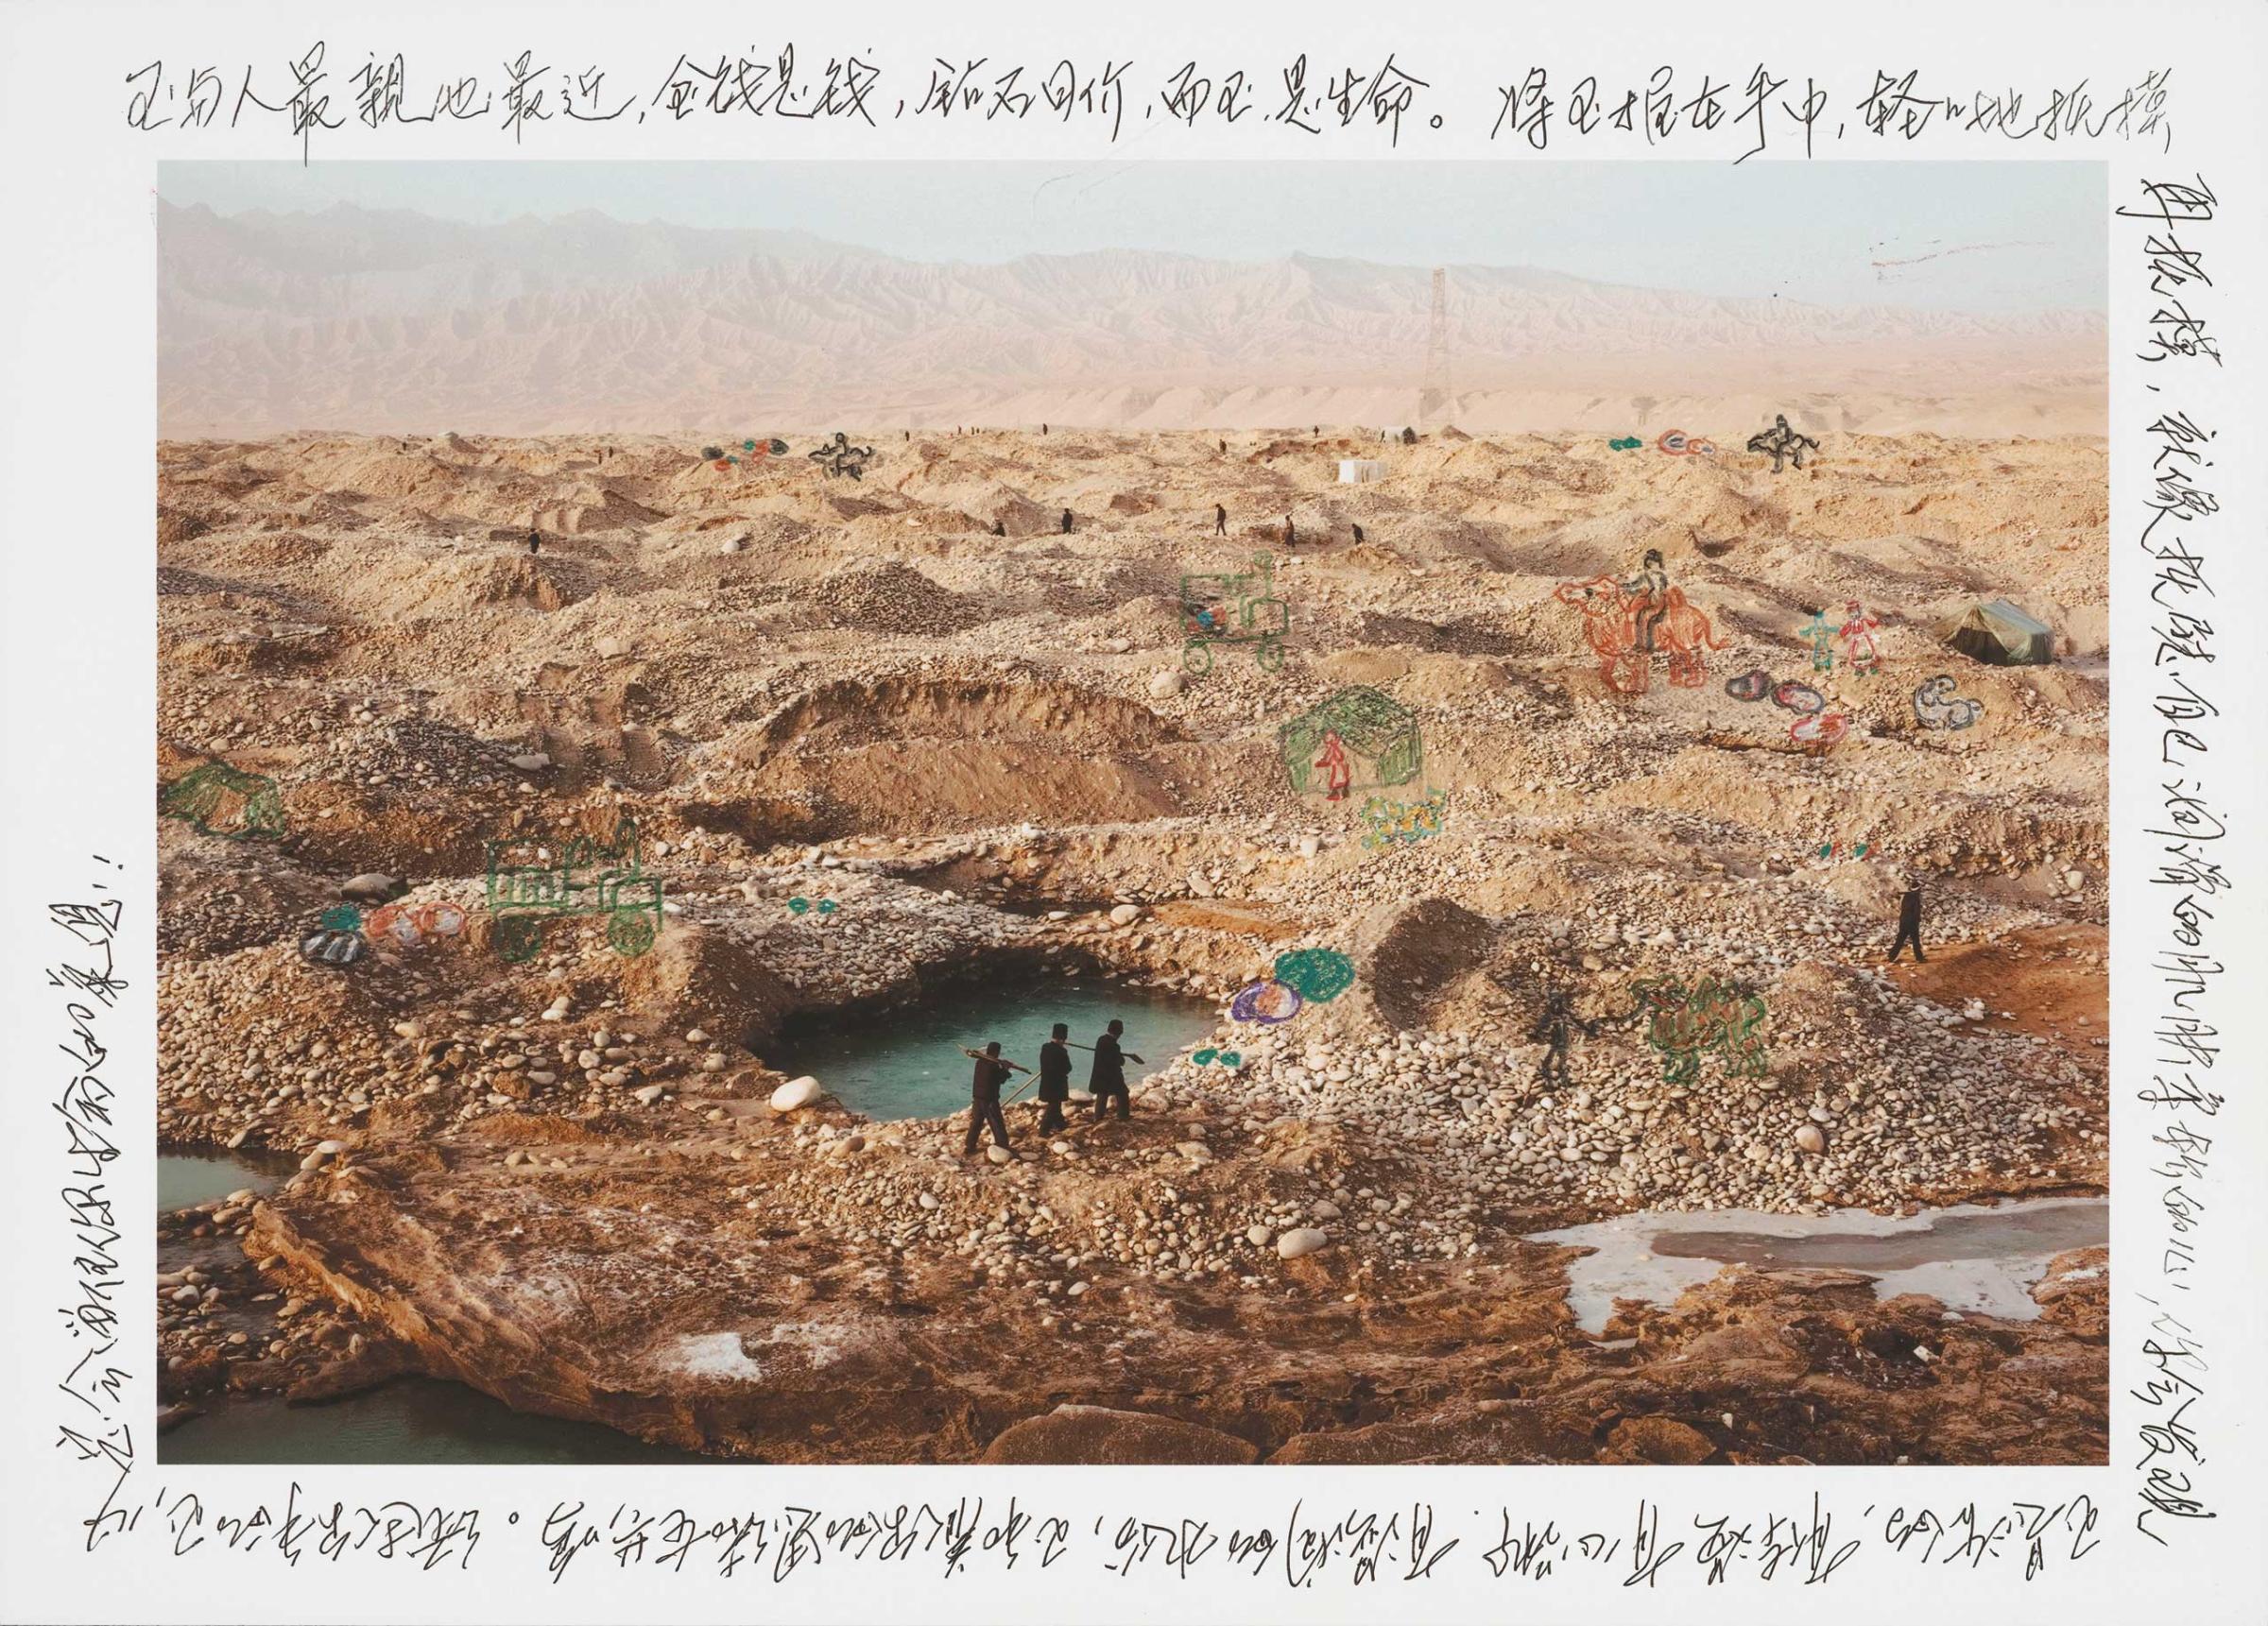 China. Xinjiang Uyghur Autonomous Region. Hotan. White Jade River. 2013. A message about the soul of jade written by a Chinese jade carver.